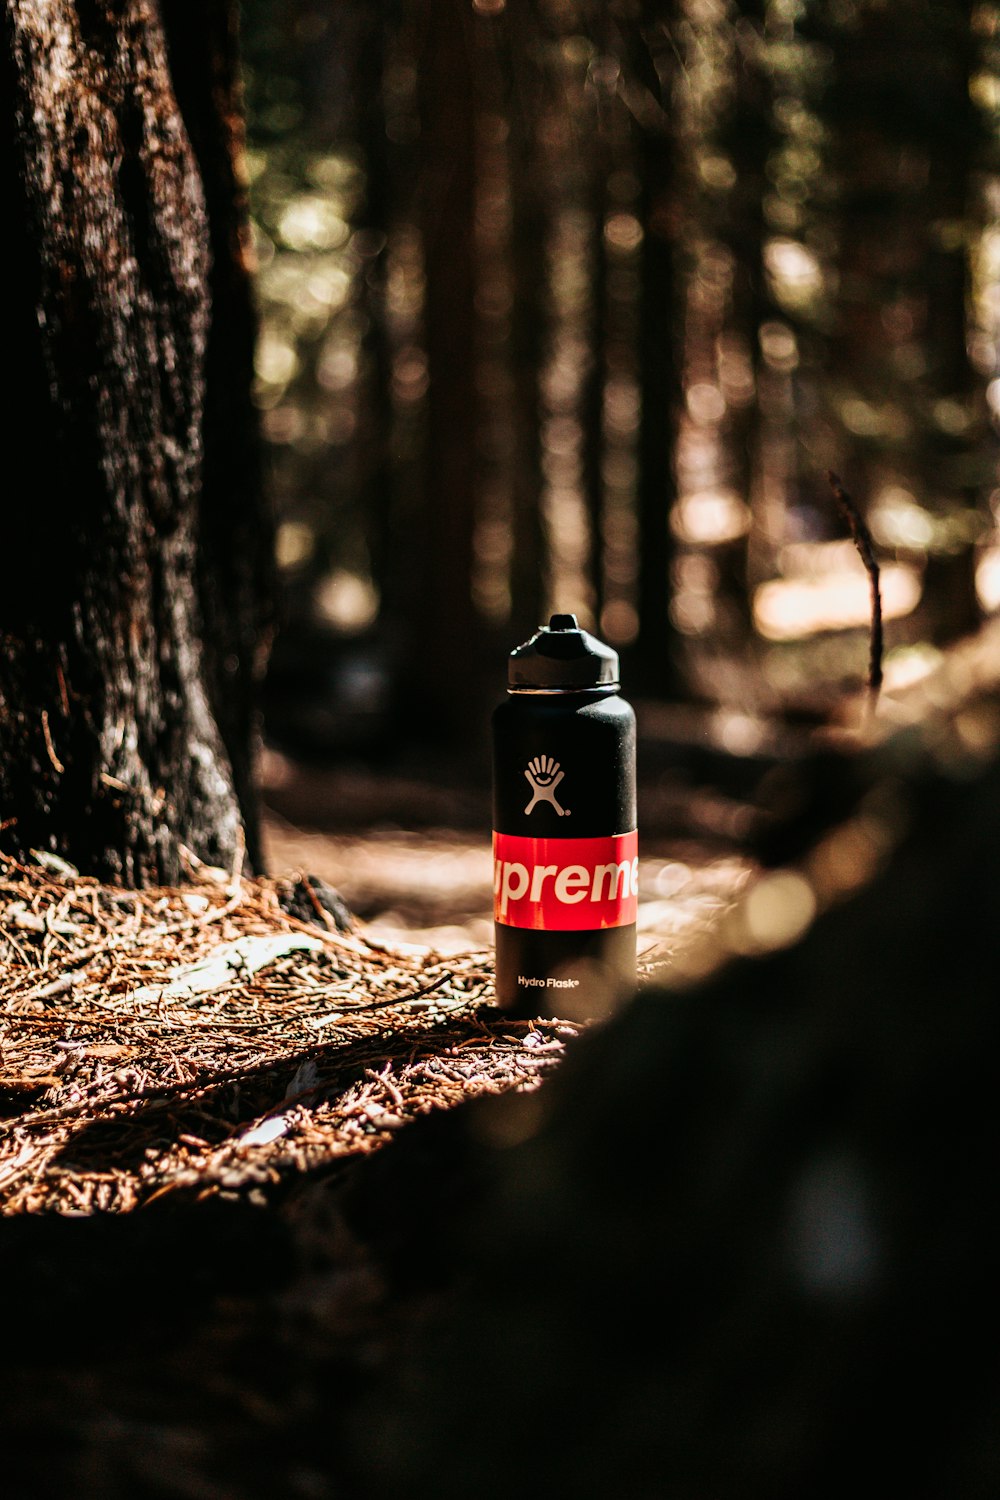 black and white Supreme sports bottle on the ground near tree